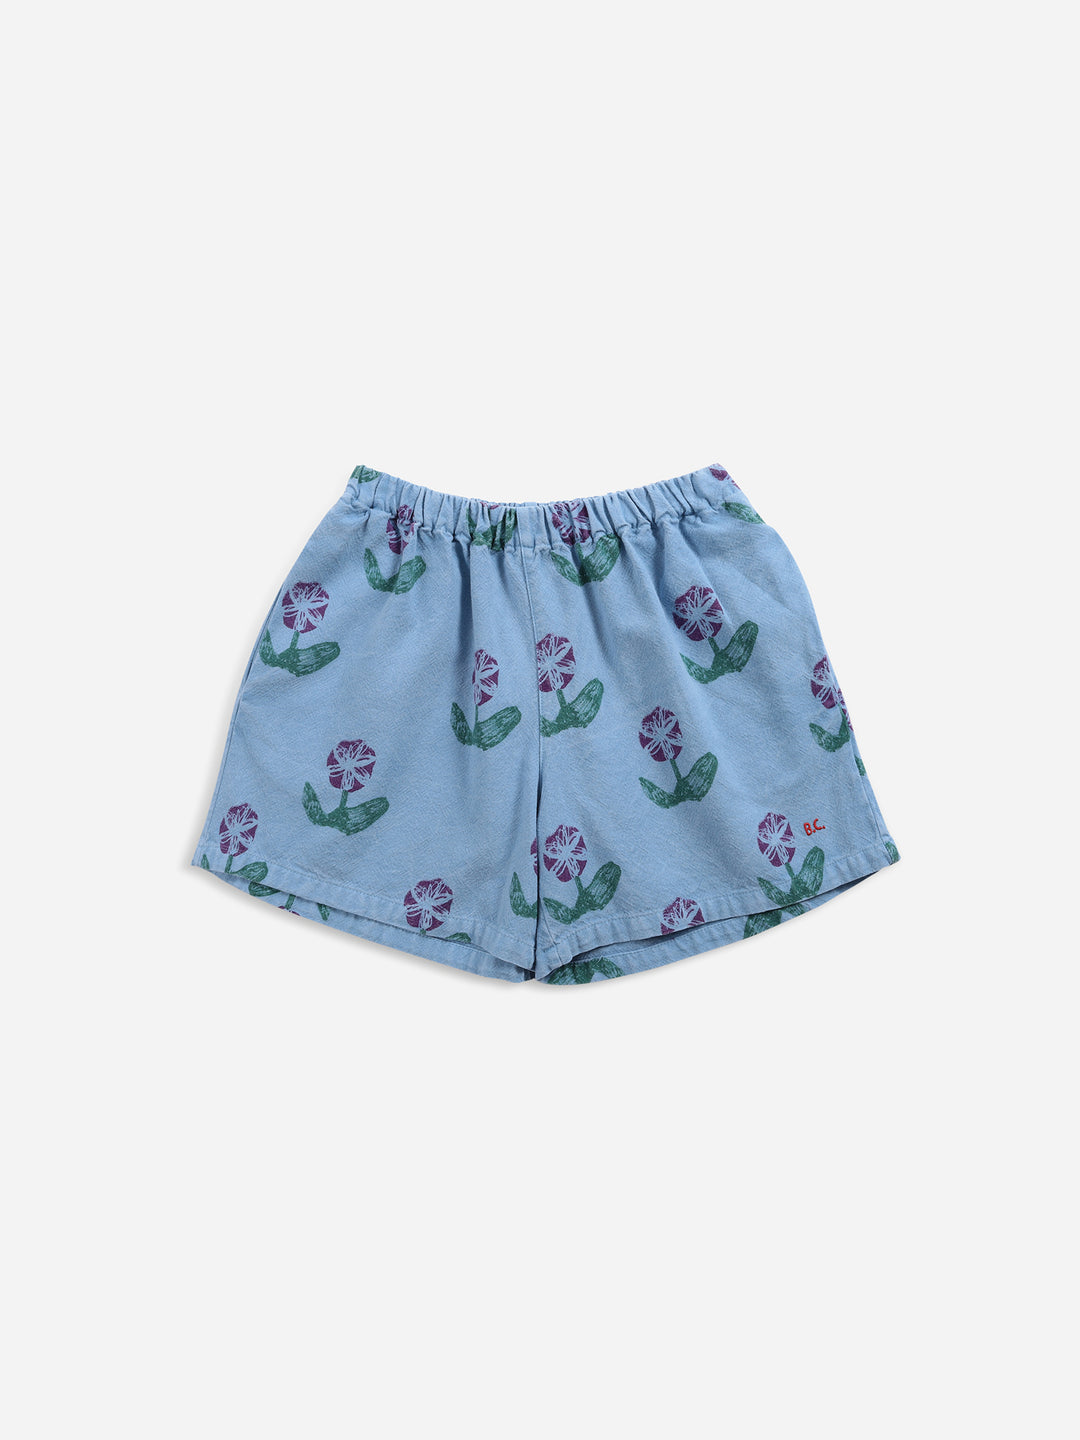 Bobo Choses blue woven culotte with purple floral print